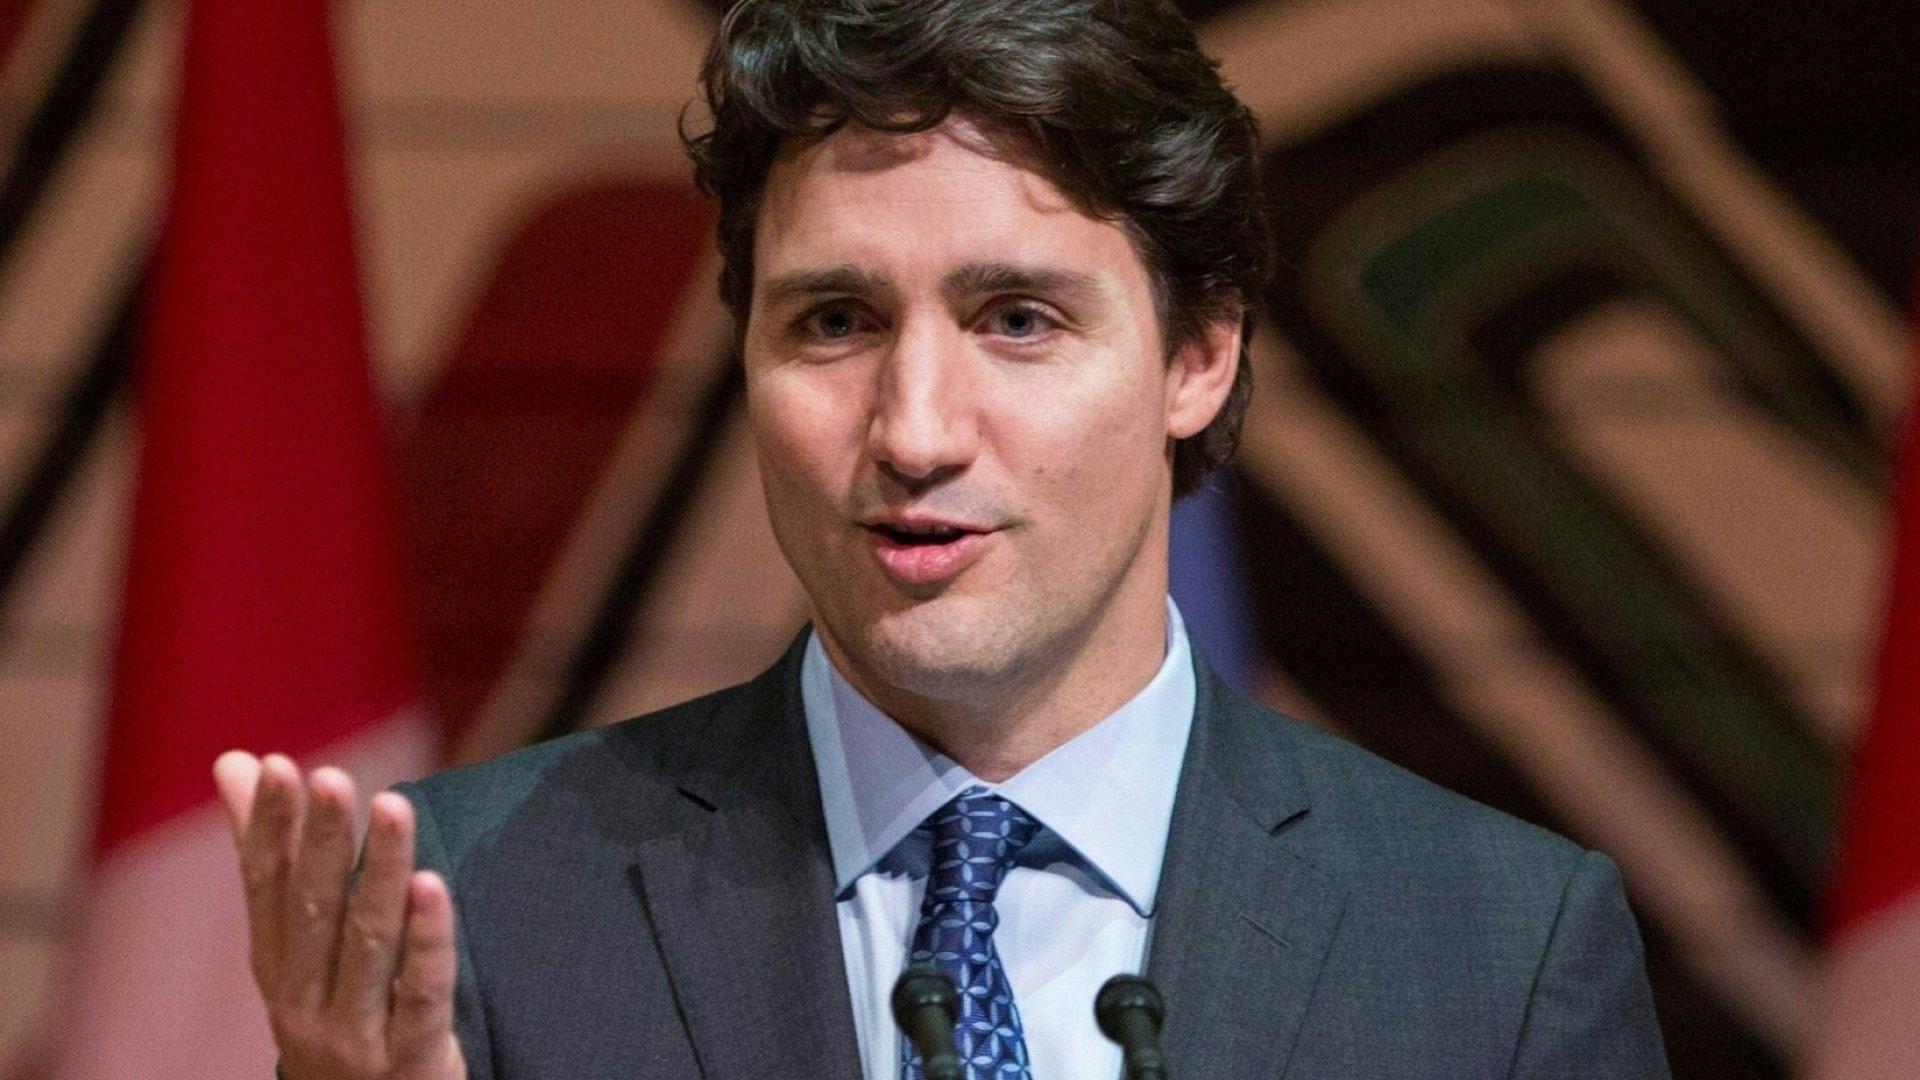 Who is Justin Trudeau - Canadian Prime Minister? | KnowInsiders